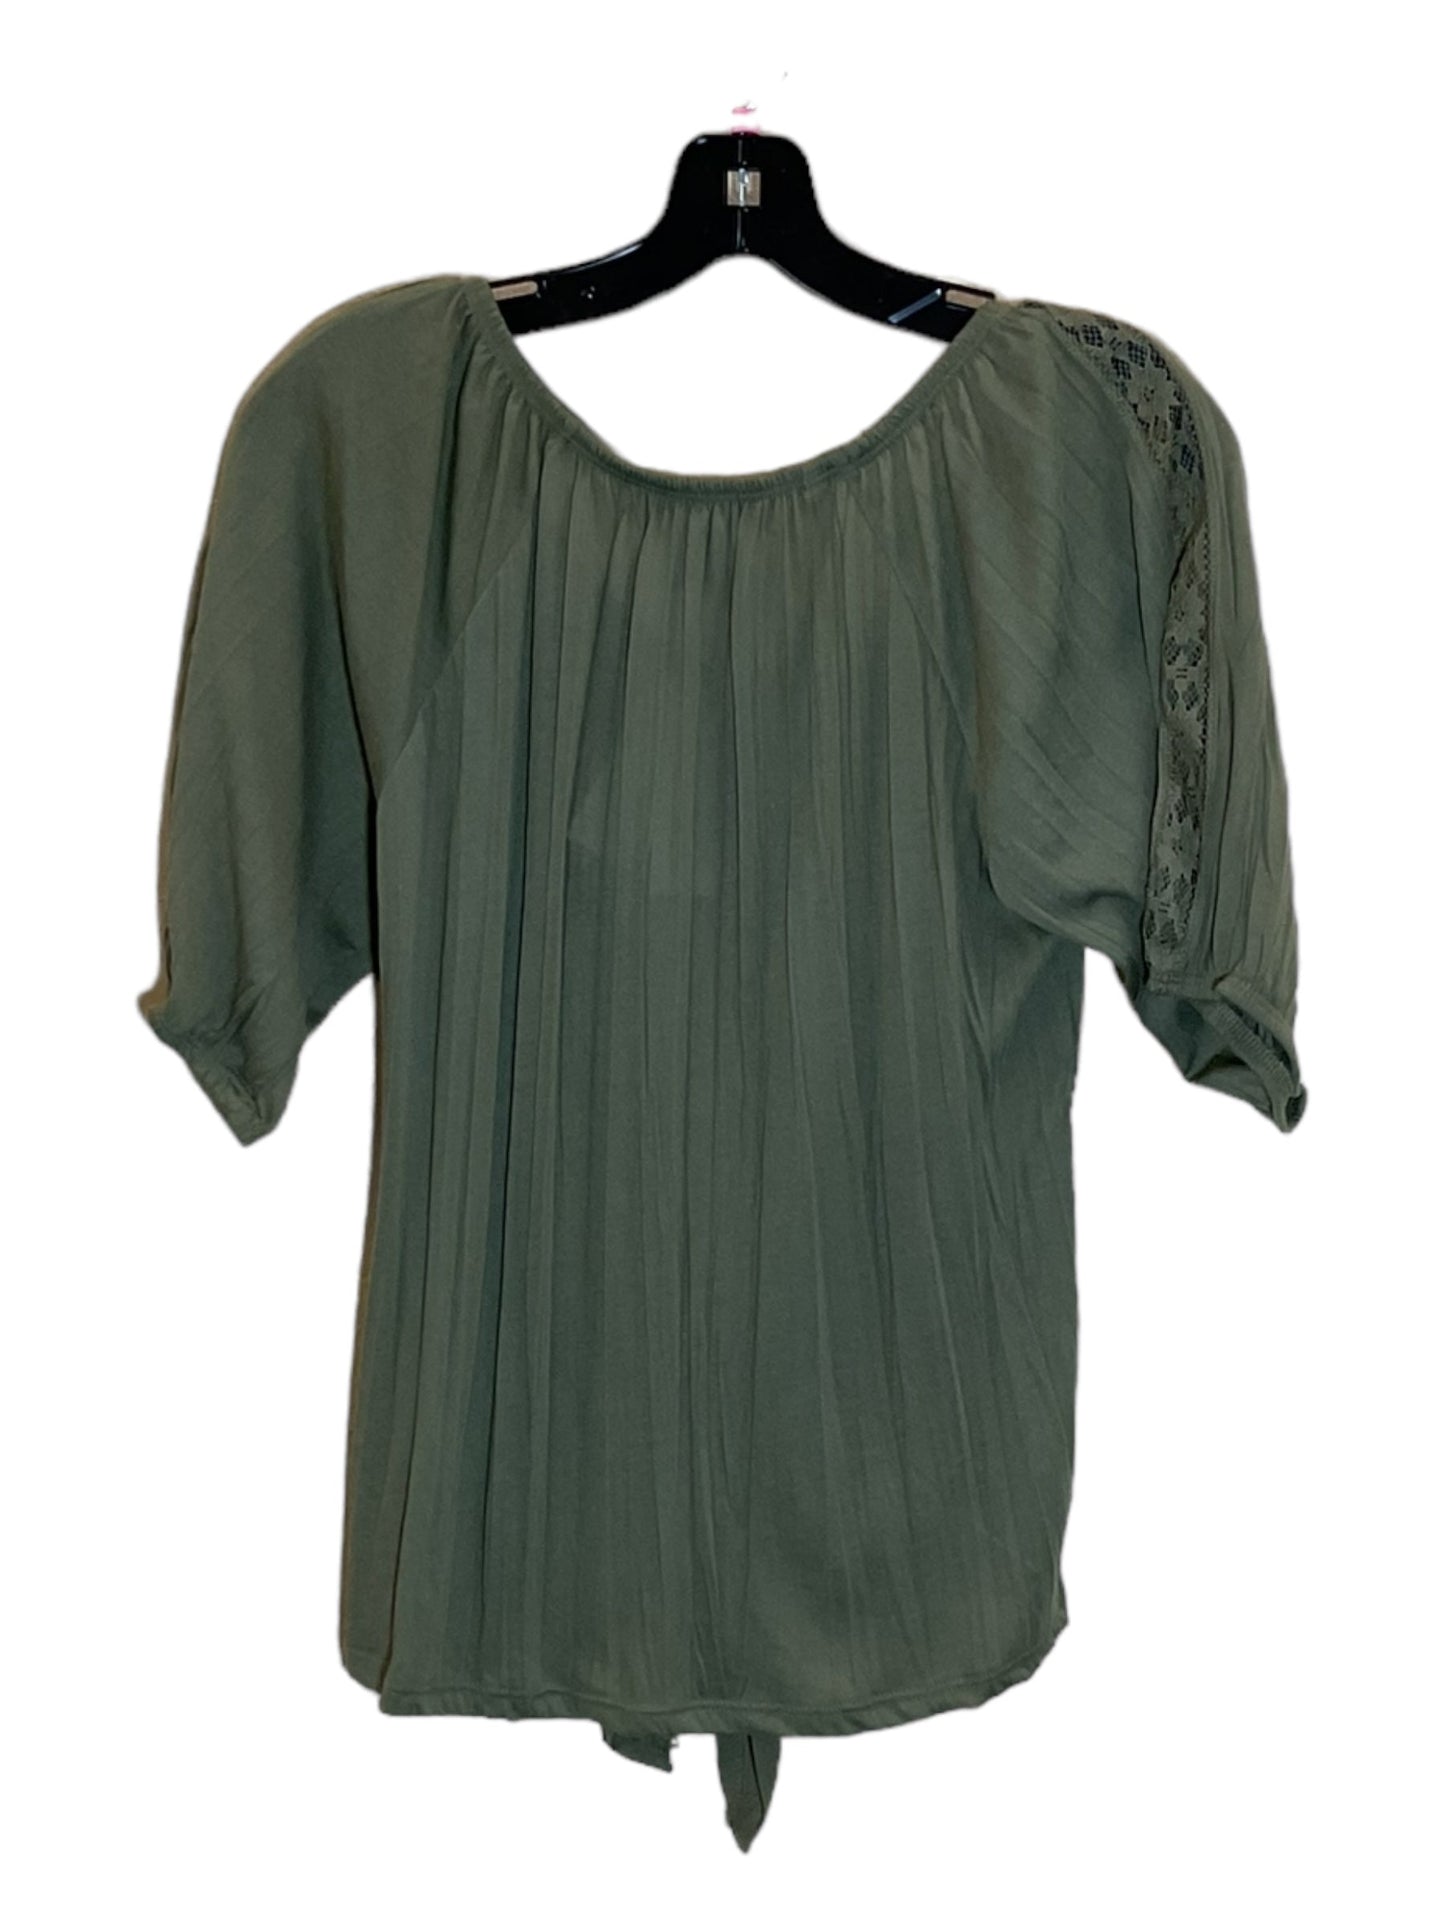 Green Top Short Sleeve French Laundry, Size Xl